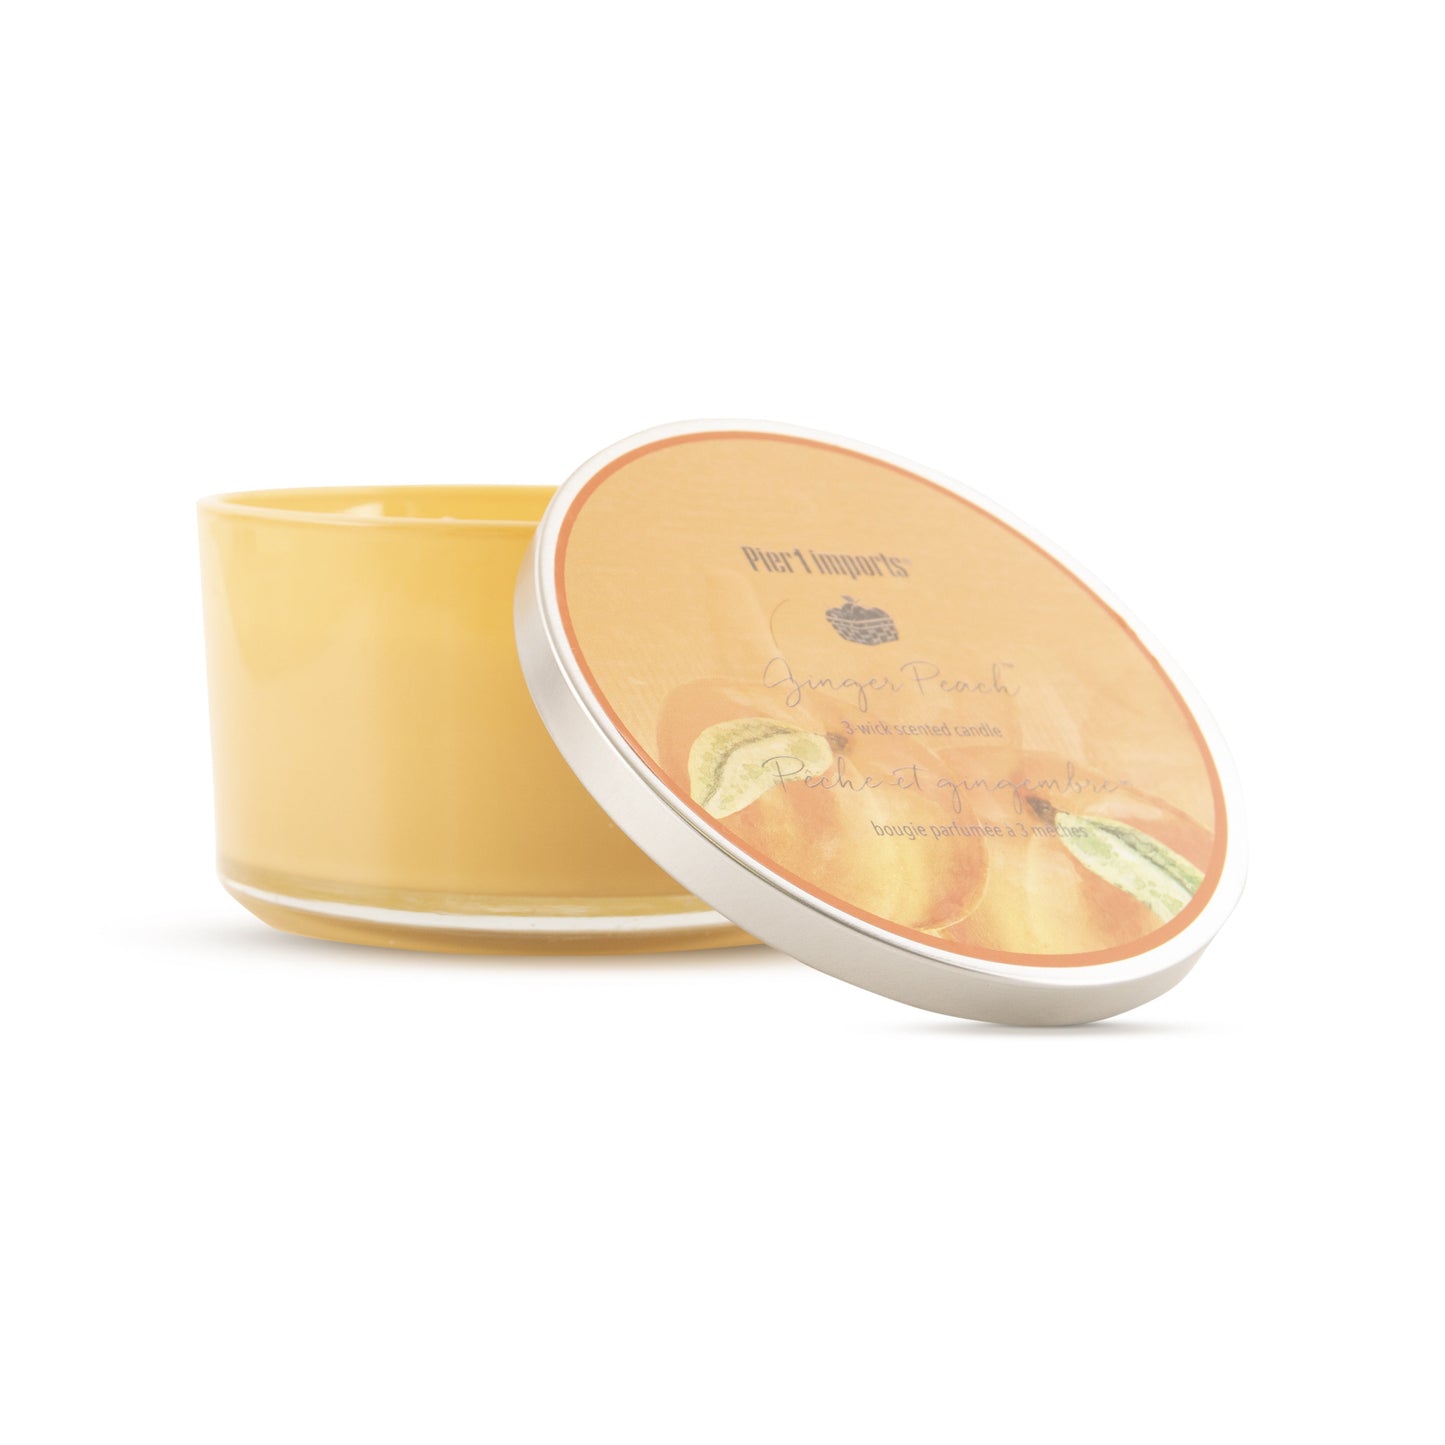 Pier 1 Ginger Peach® Filled 3-Wick Candle 14oz - The Home Resolution